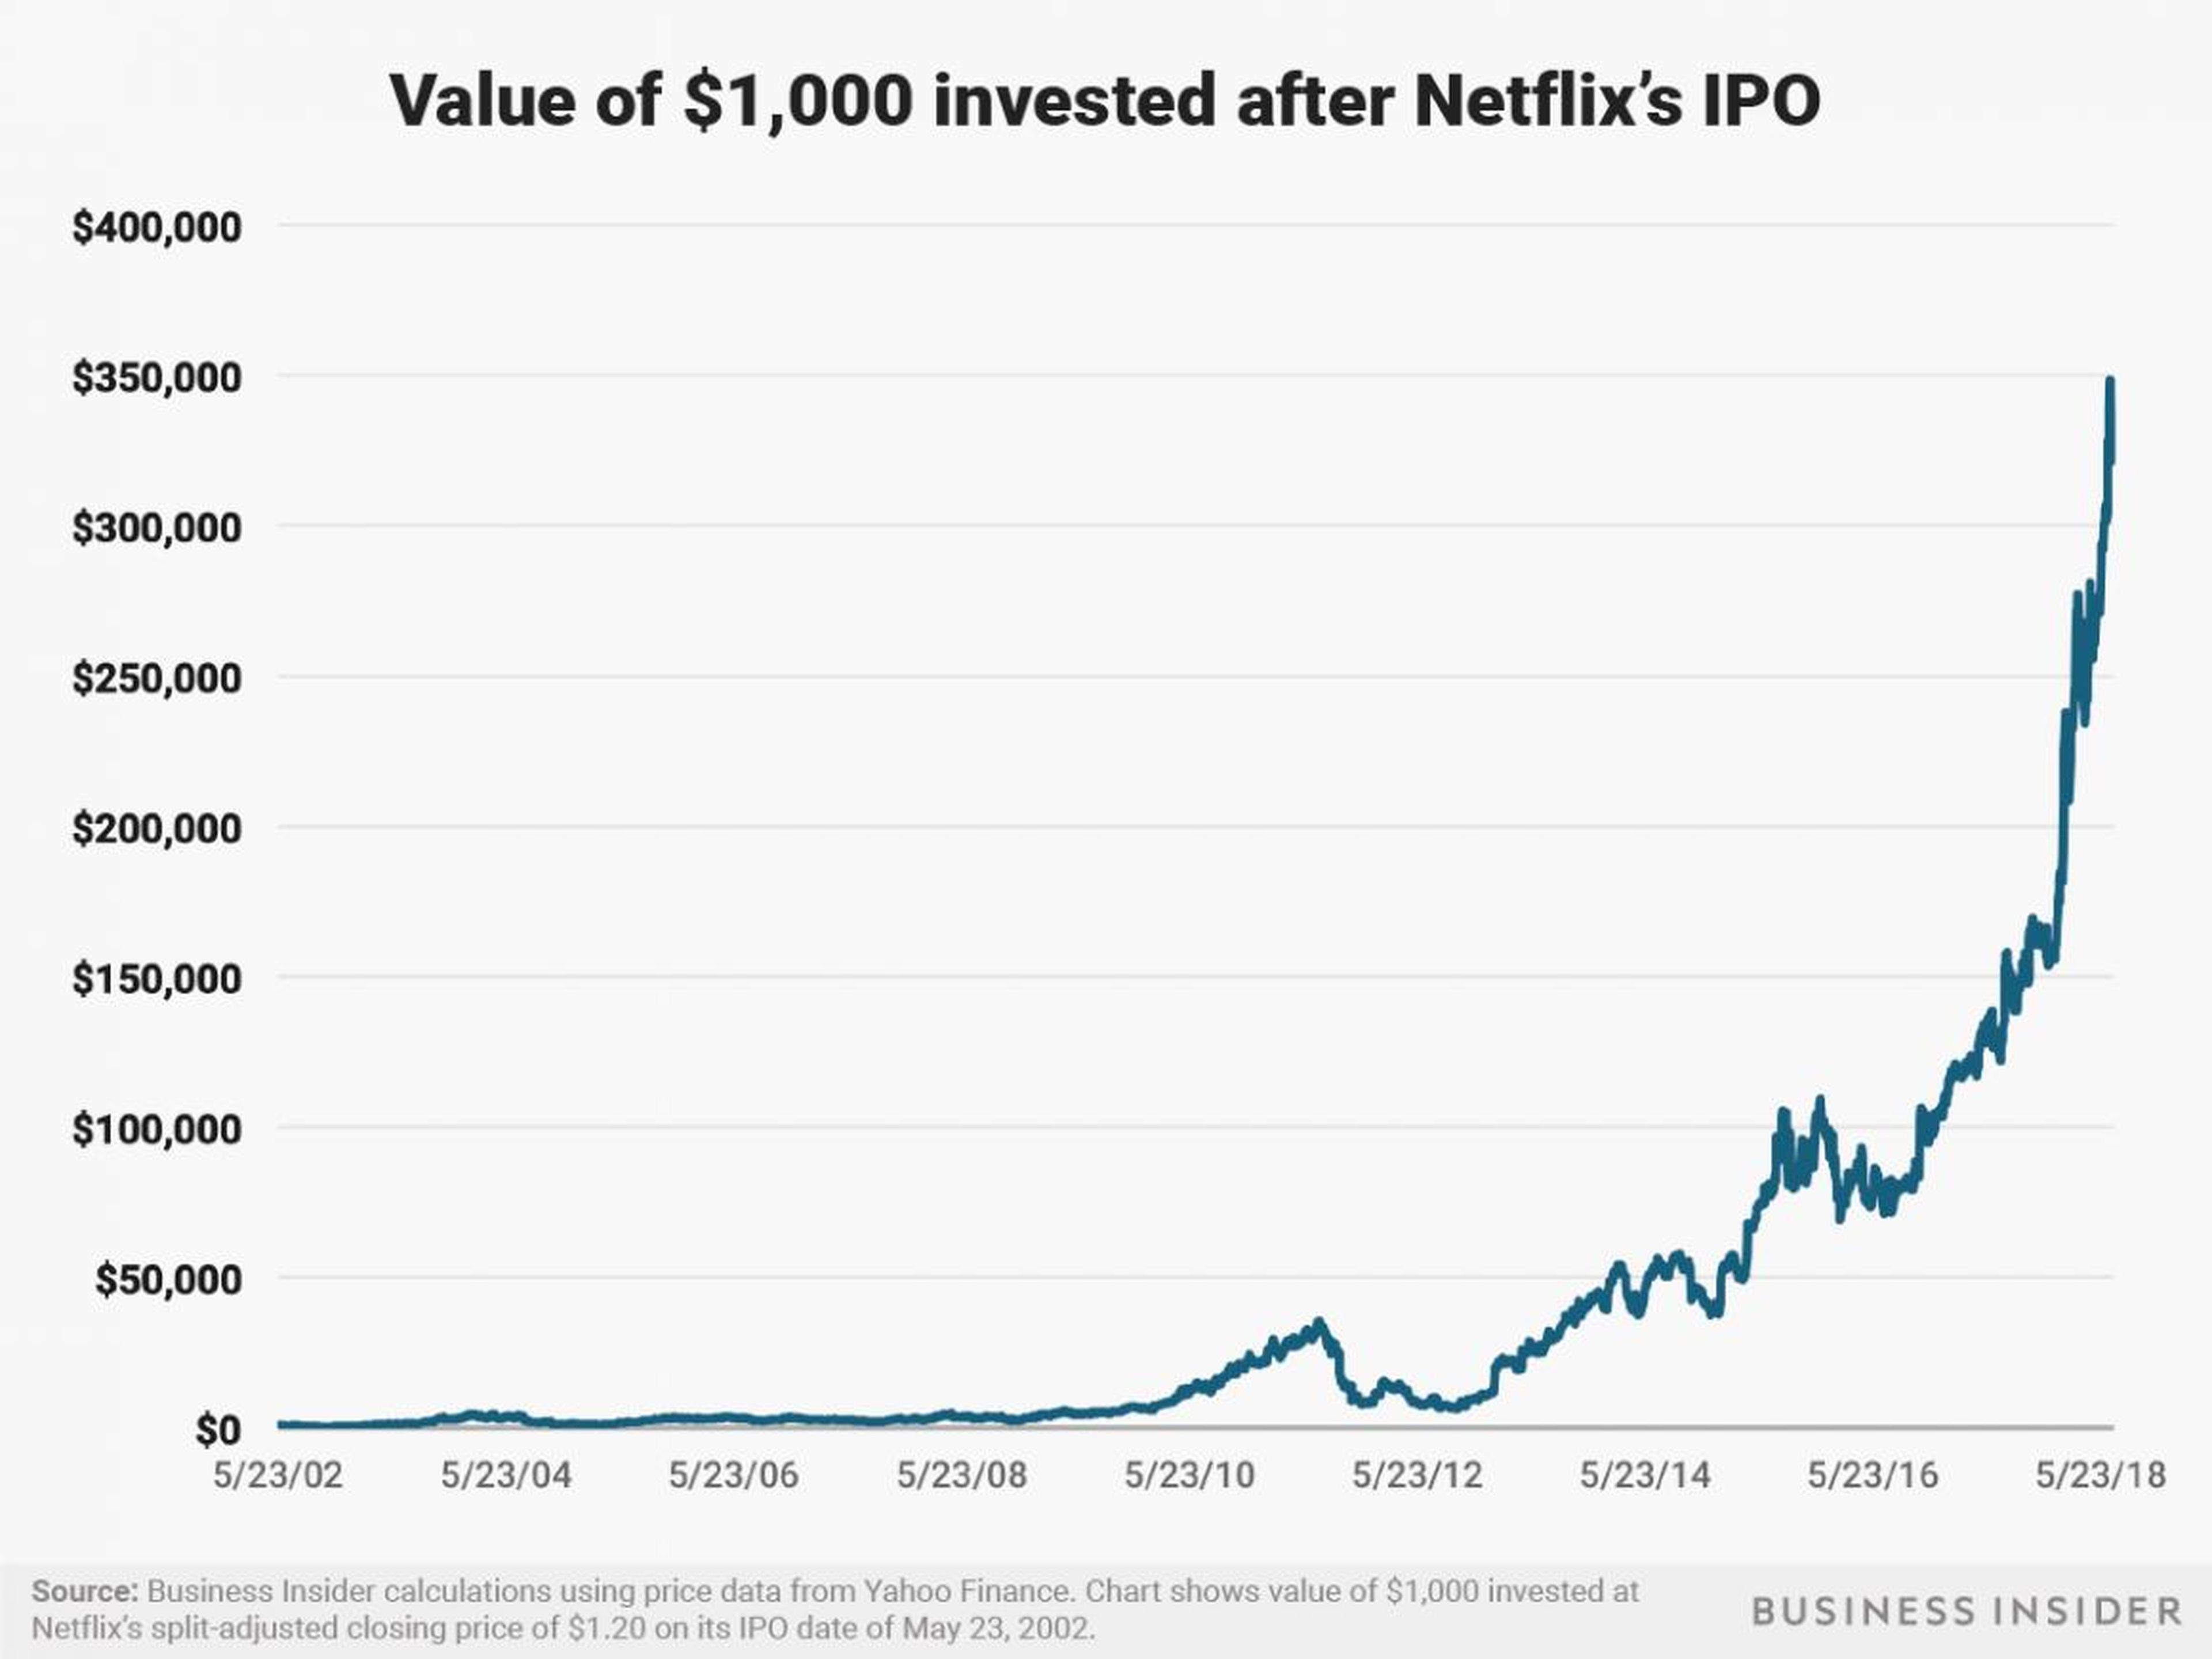 A $1,000 investment in Netflix after its May 23, 2002 IPO would be worth around $326,000 now.